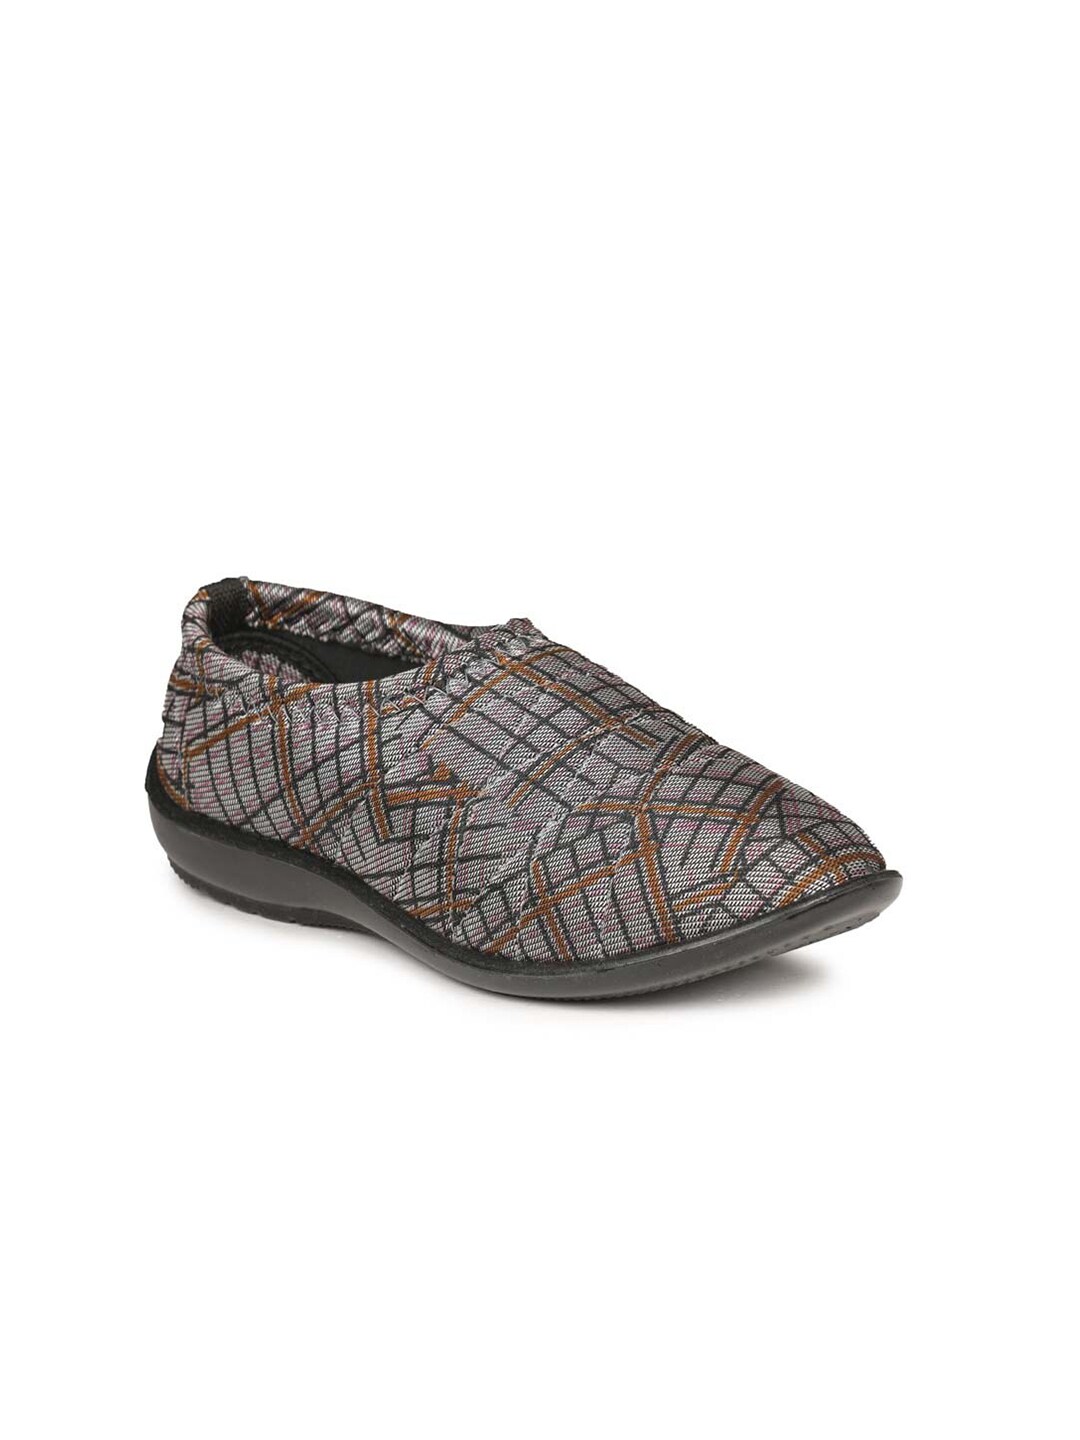 Paragon Women Grey & Brown Printed Slip-On Casual Shoes Price in India